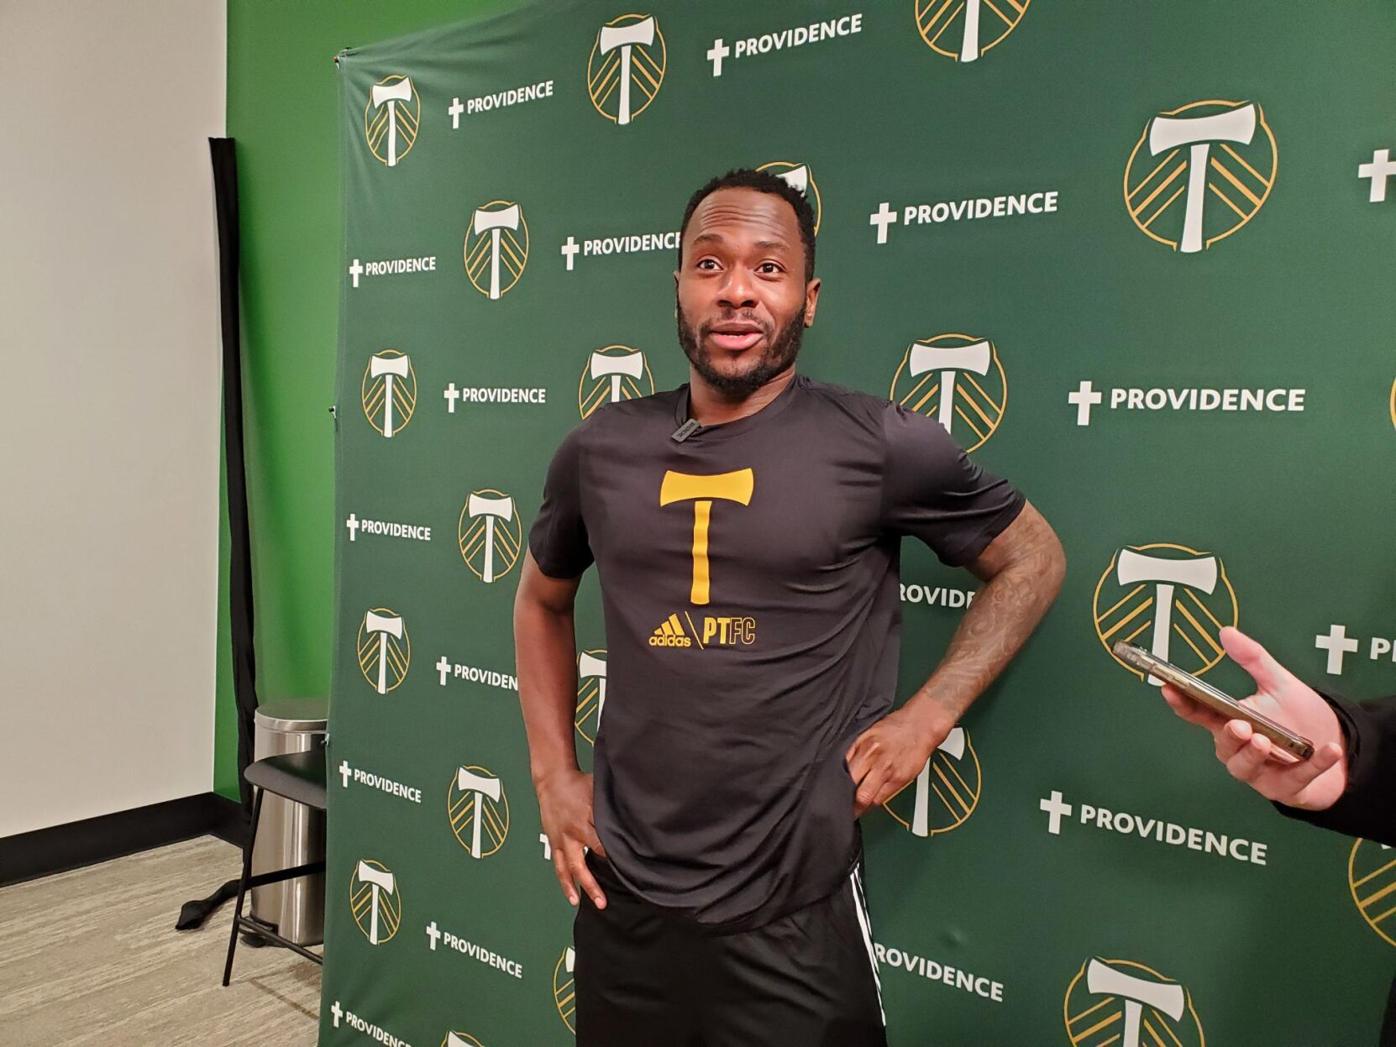 Franck Boli brings experience, goal-scoring ability to shorthanded Portland  Timbers: 'He's excited' 